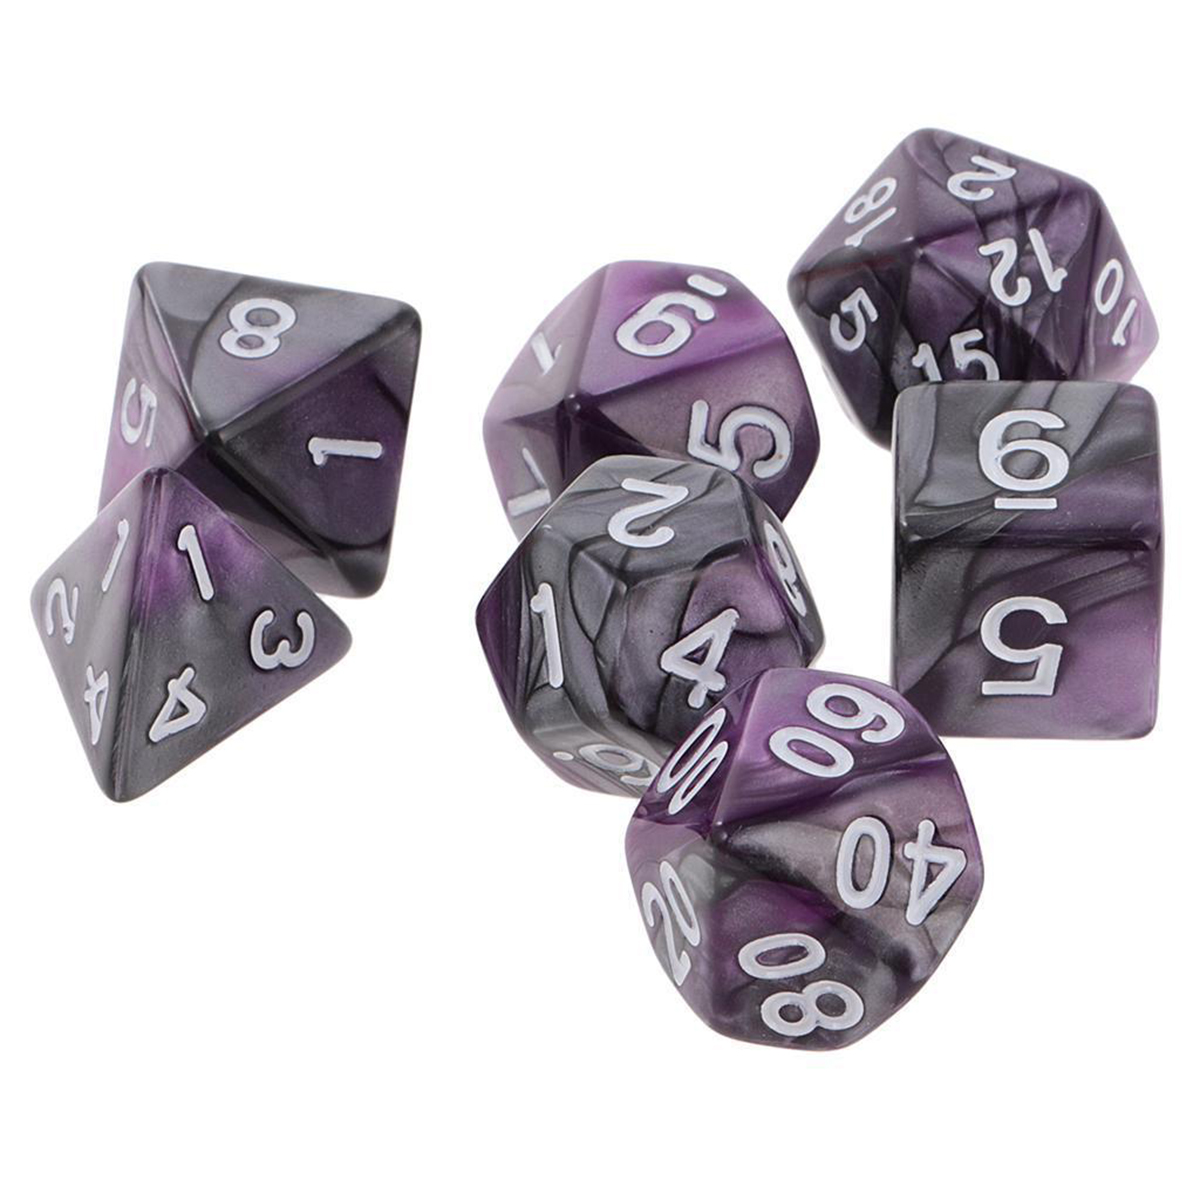 7Pcs-Purple-Gemini-Acrylic-Polyhedral-Dice-For-Dungeons-Dragons-RPG-RPG-With-Bag-1303425-3